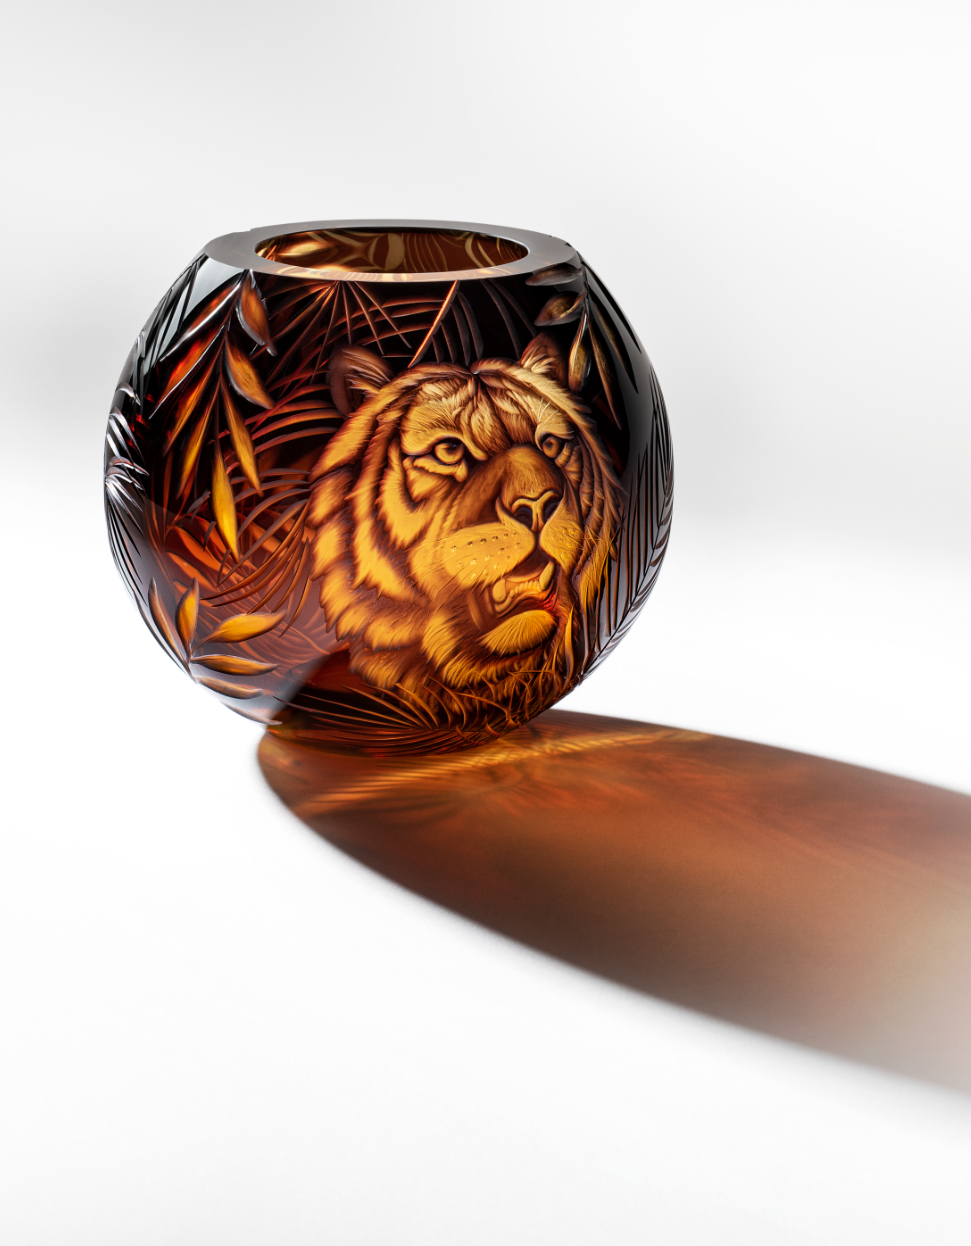 Beauty vase with tiger engraving, 13 cm - gallery #1